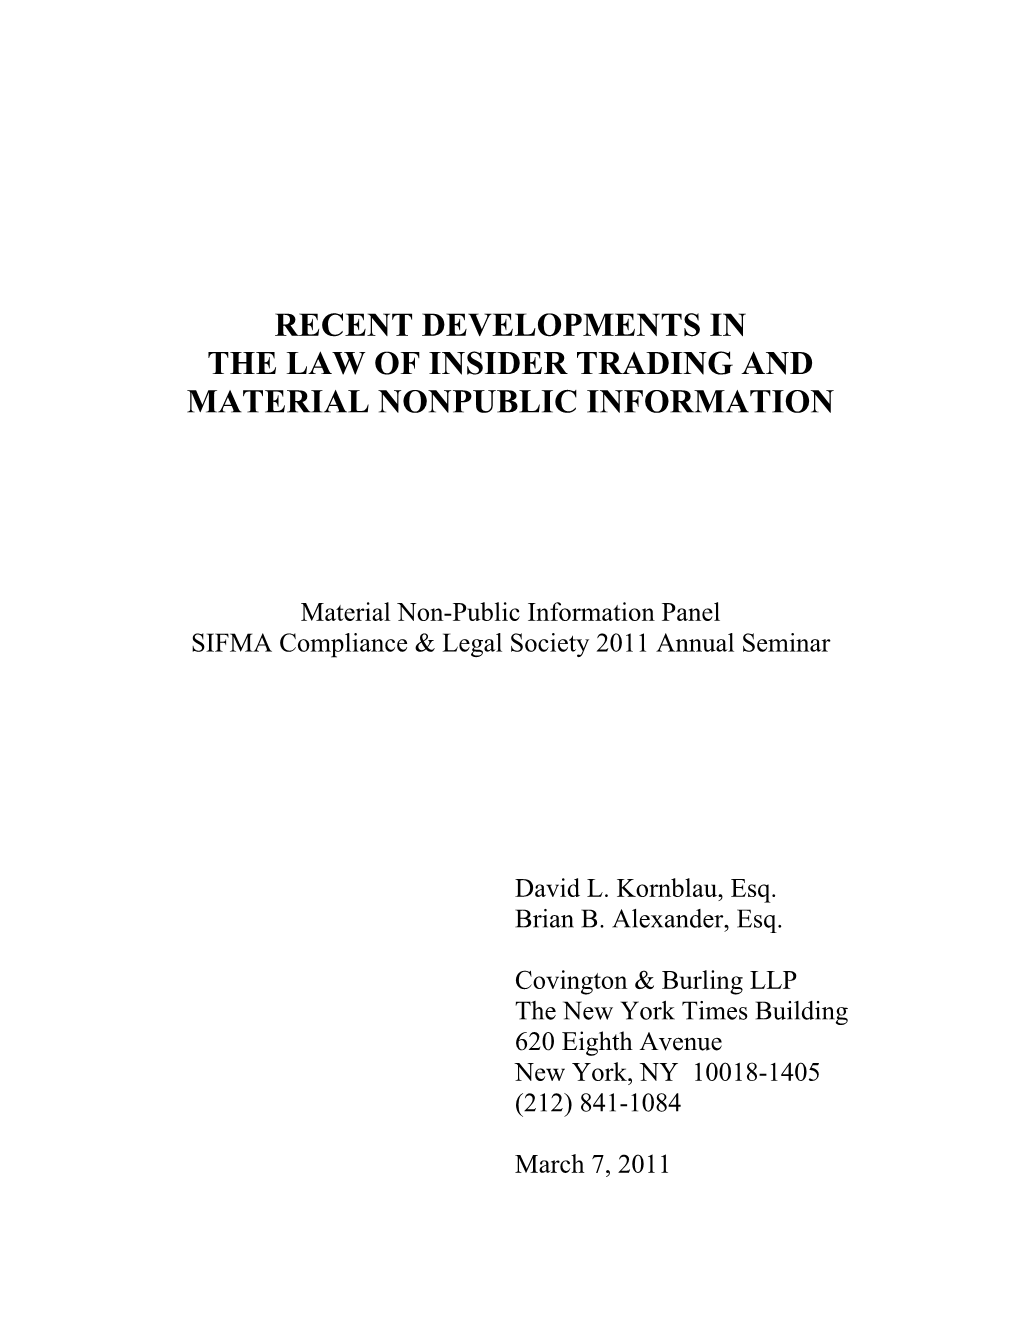 Recent Developments in the Law of Insider Trading and Material Nonpublic Information